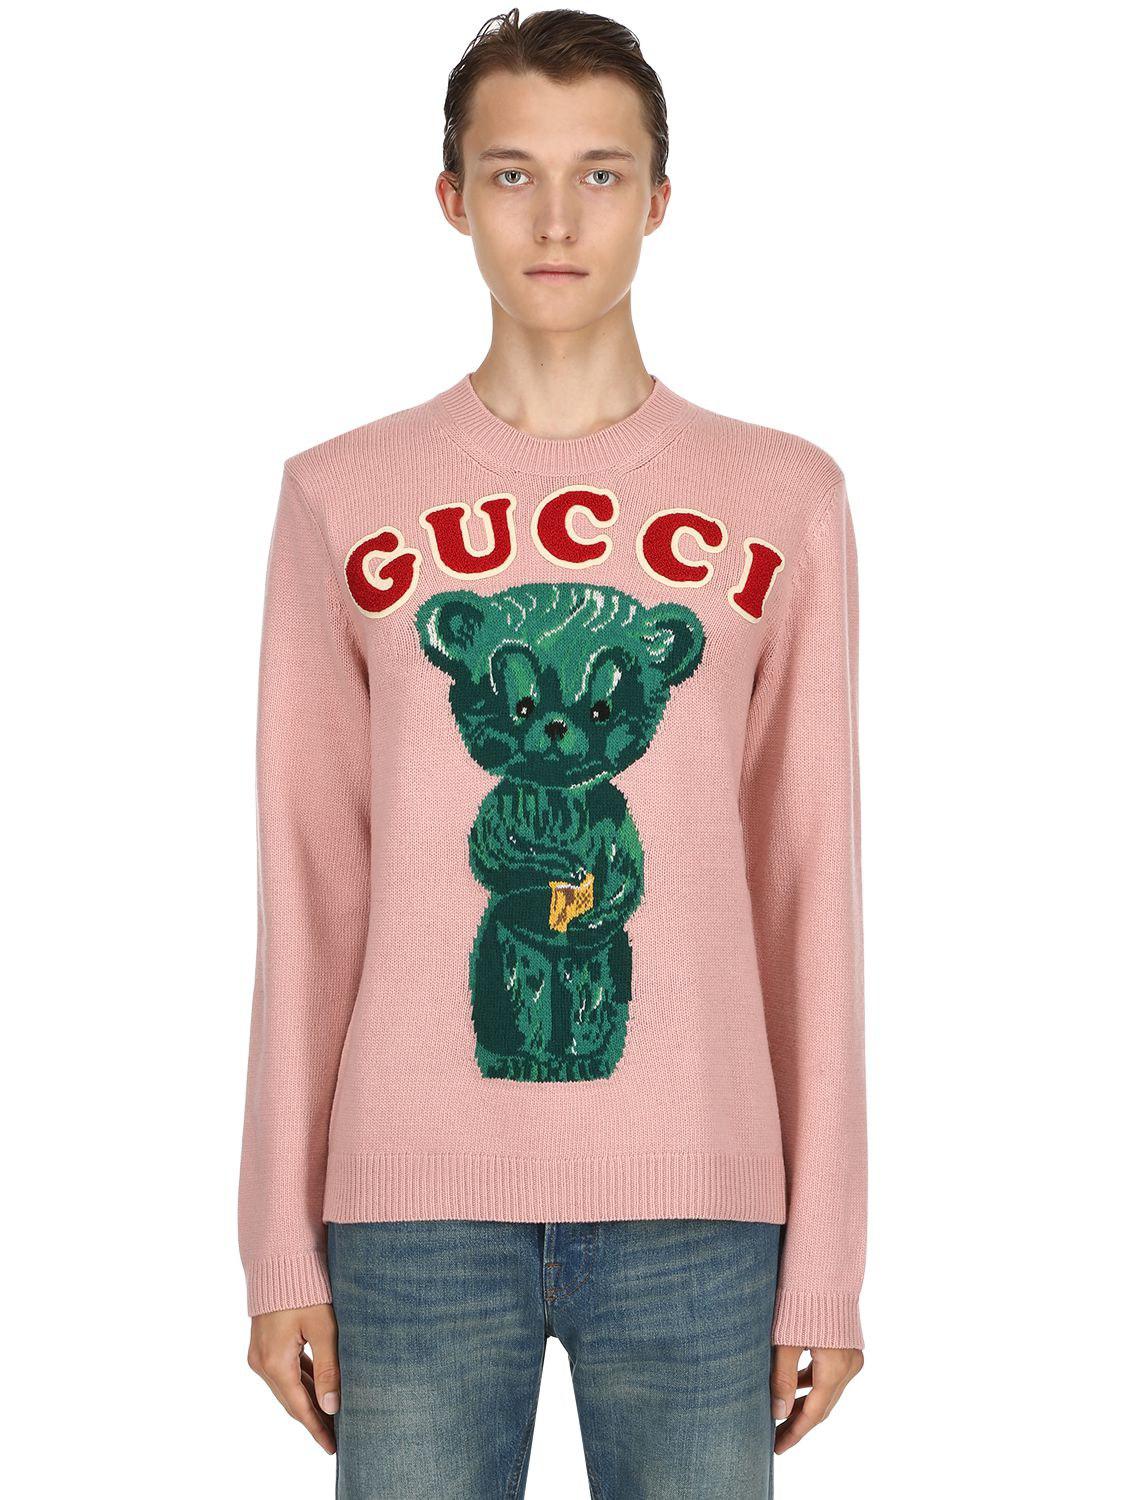 Gucci Mens Guccy Teddy Bear Sweatshirt Size Large Pink Cotton Pullover  Sweater